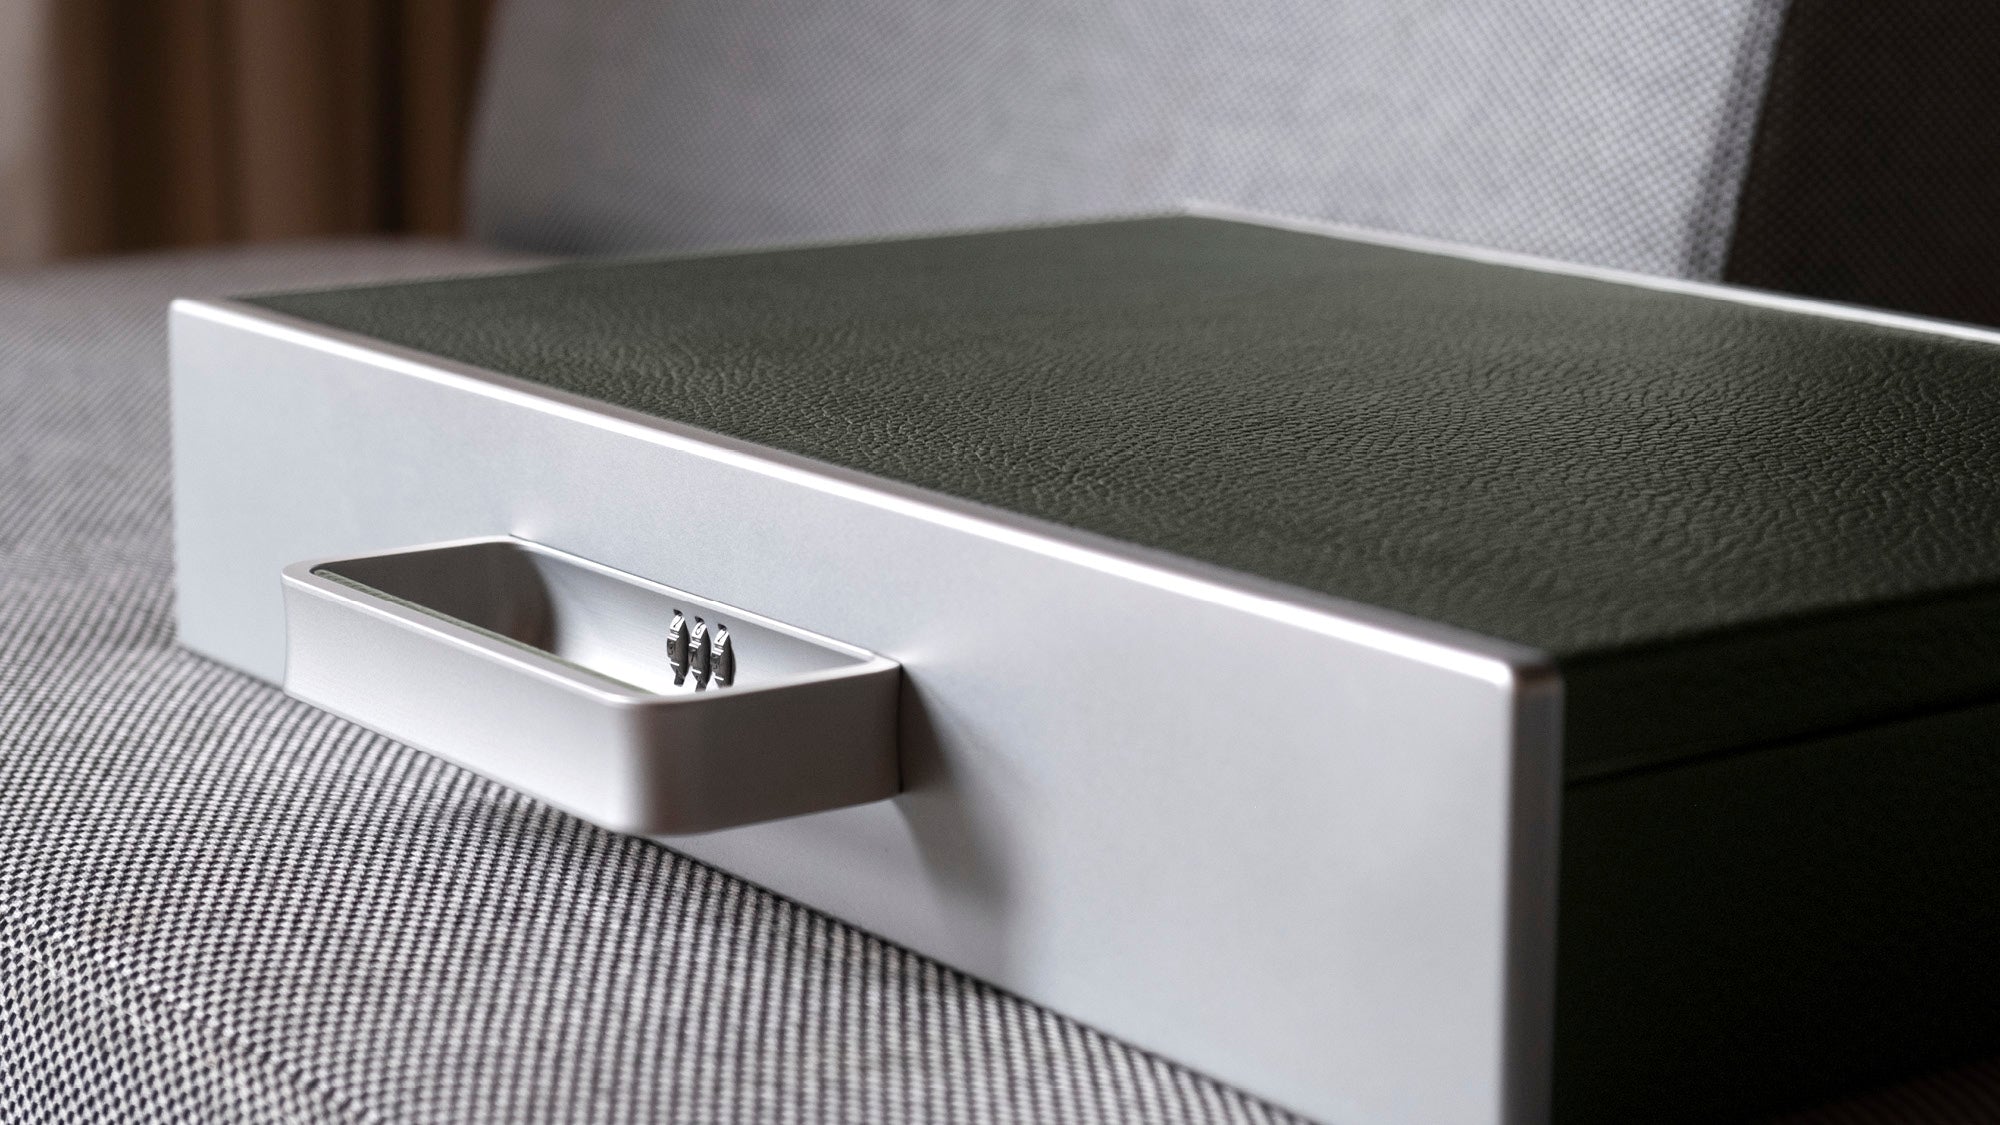 Detail shot of handle and protective lock of the Mackenzie Briefcase in grey and khaki leather